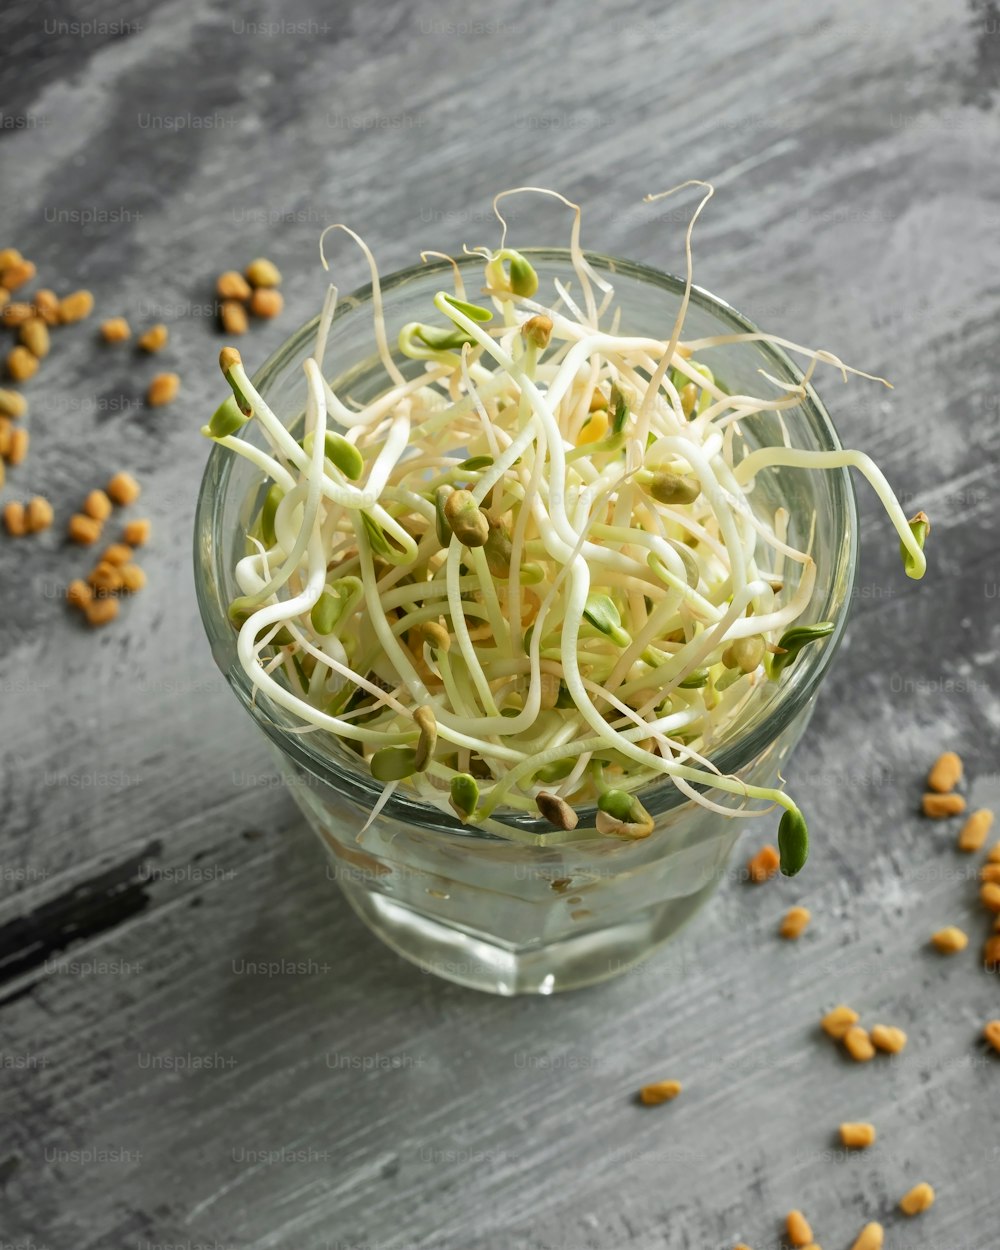 Fresh fenugreek sprouts in a glass on a table